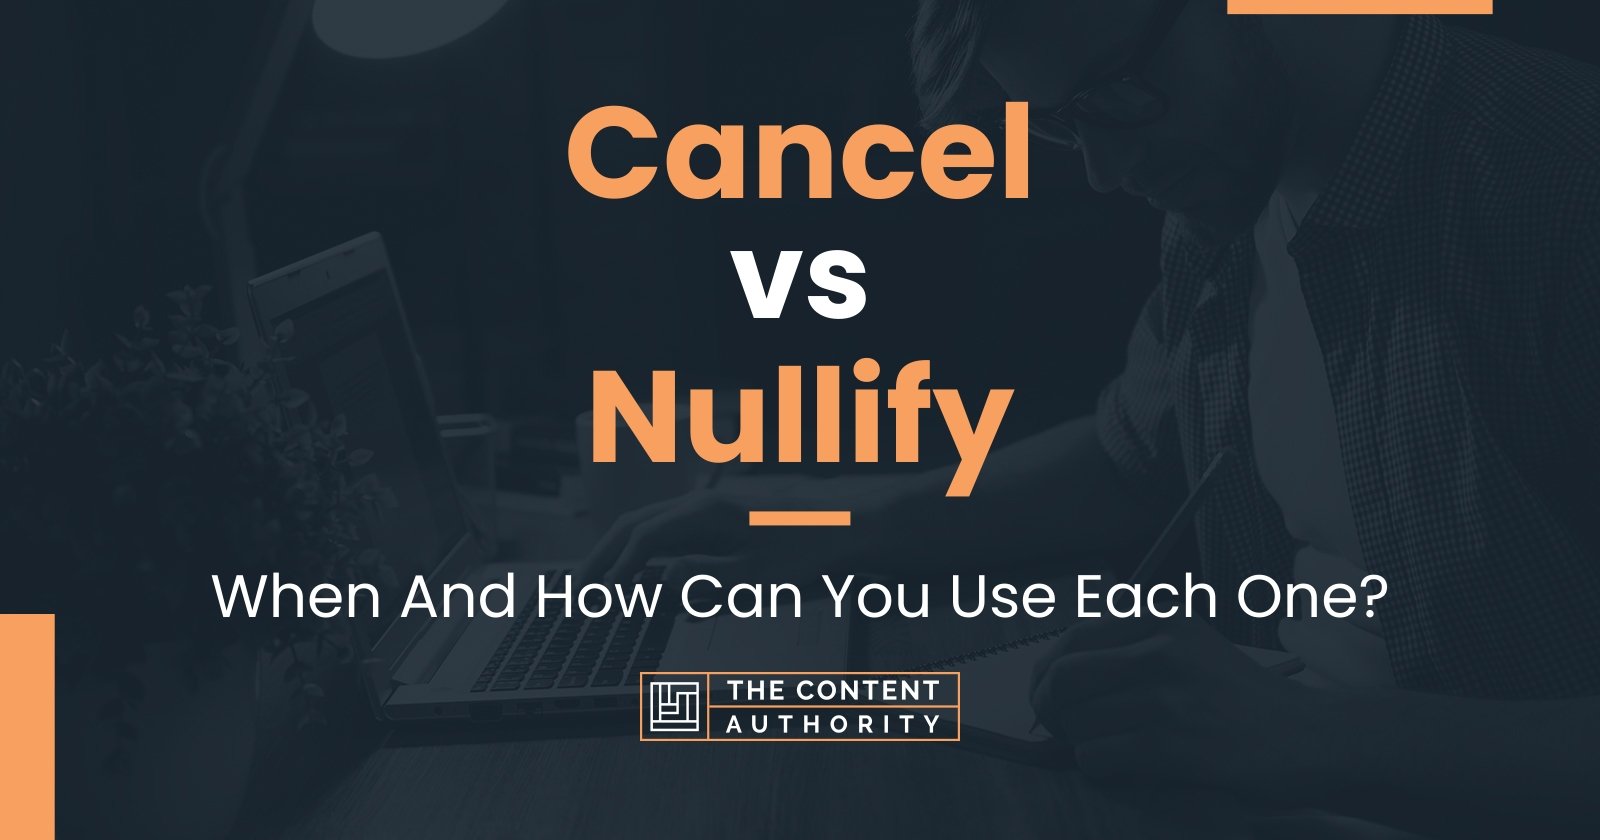 Cancel vs Nullify: When And How Can You Use Each One?